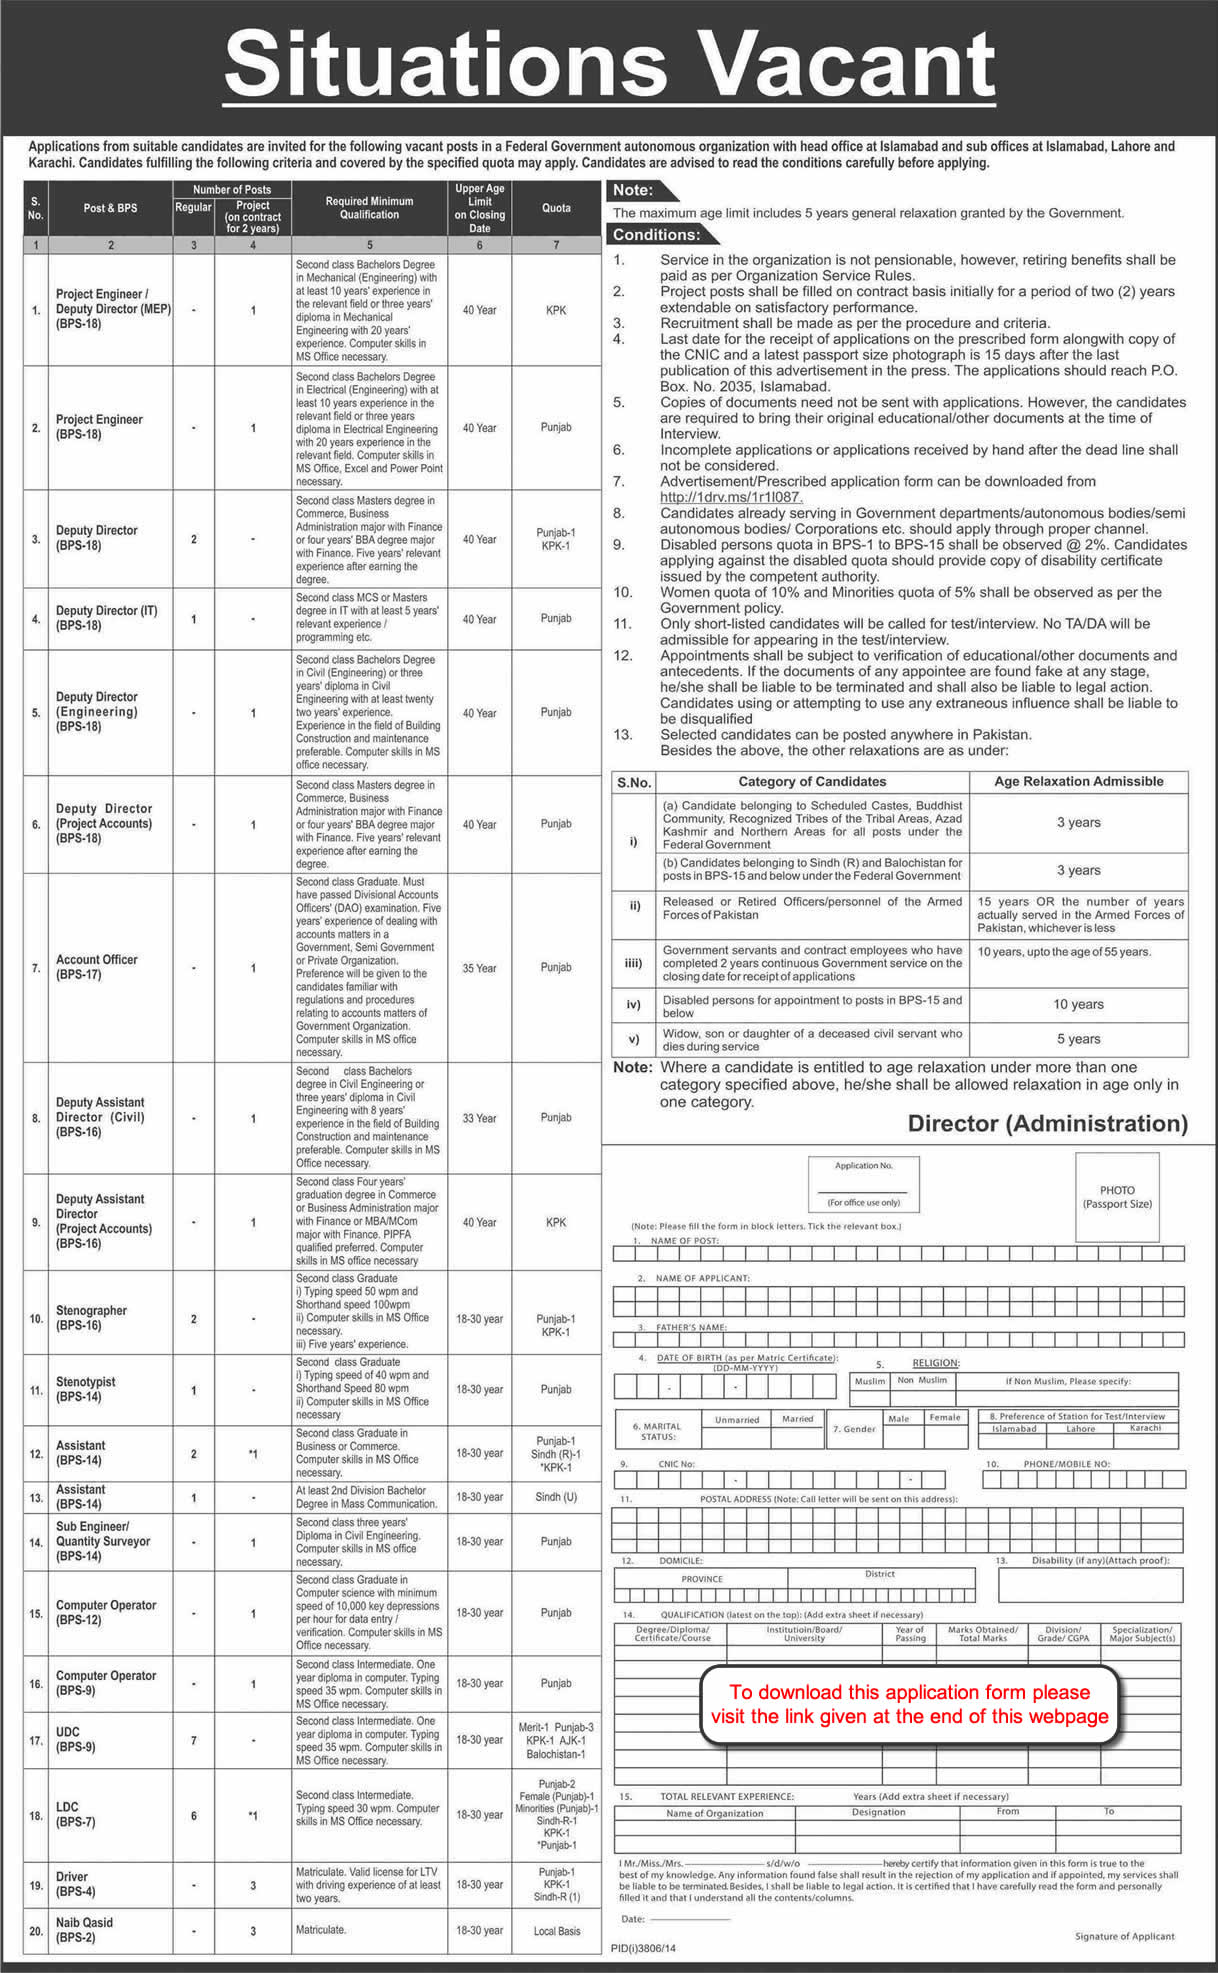 PO Box 2035 Islamabad Jobs 2015 Application Form Federal Employees Benevolent and Group Insurance Funds